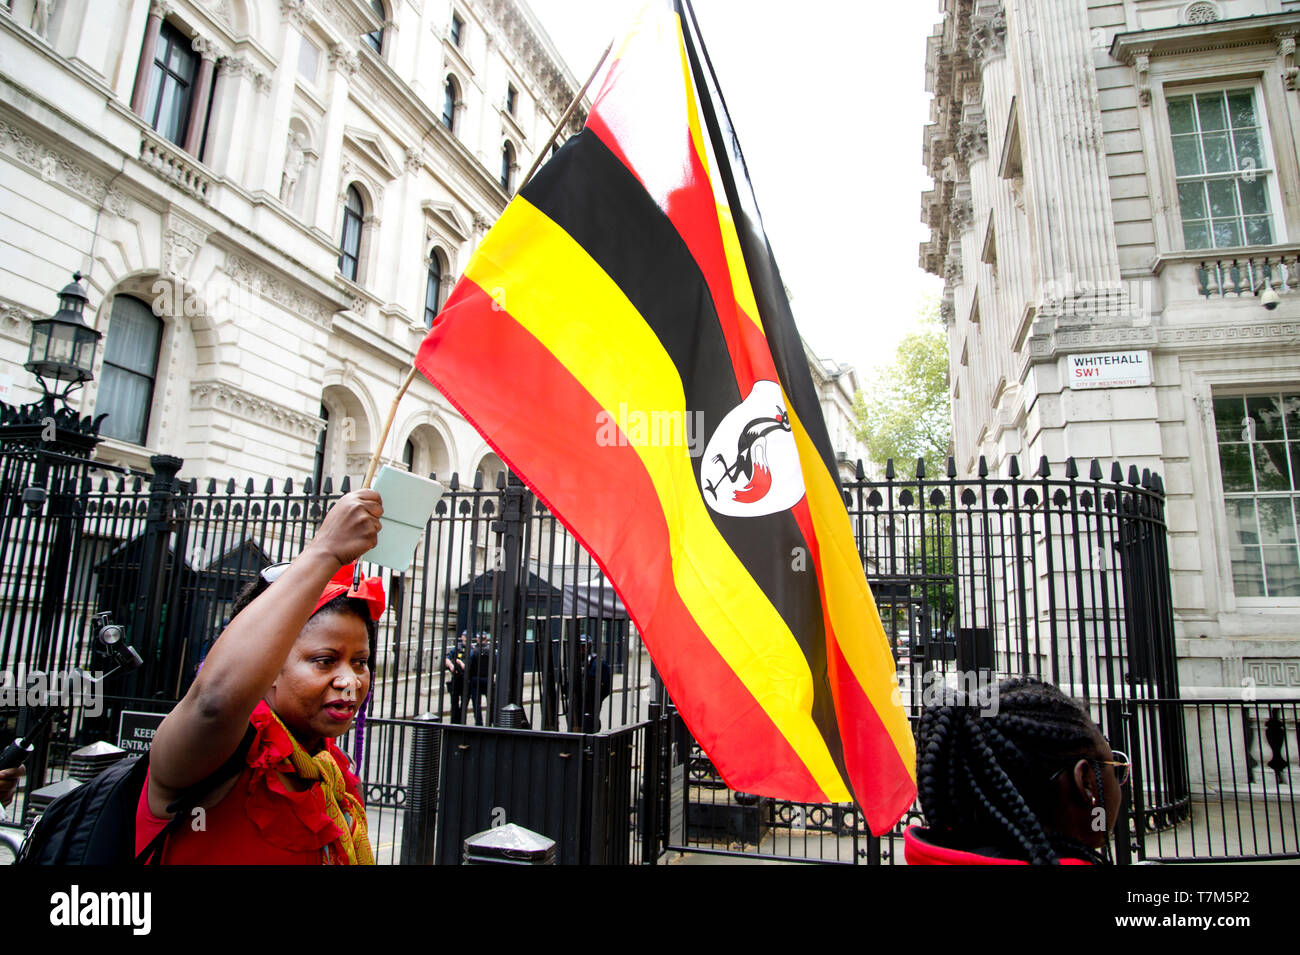 Westminster May7th 2019. Ugandans demonstrate against the Government of President Museveni (M7). A woman waves a Ugandan flag in front of Downing Stre Stock Photo